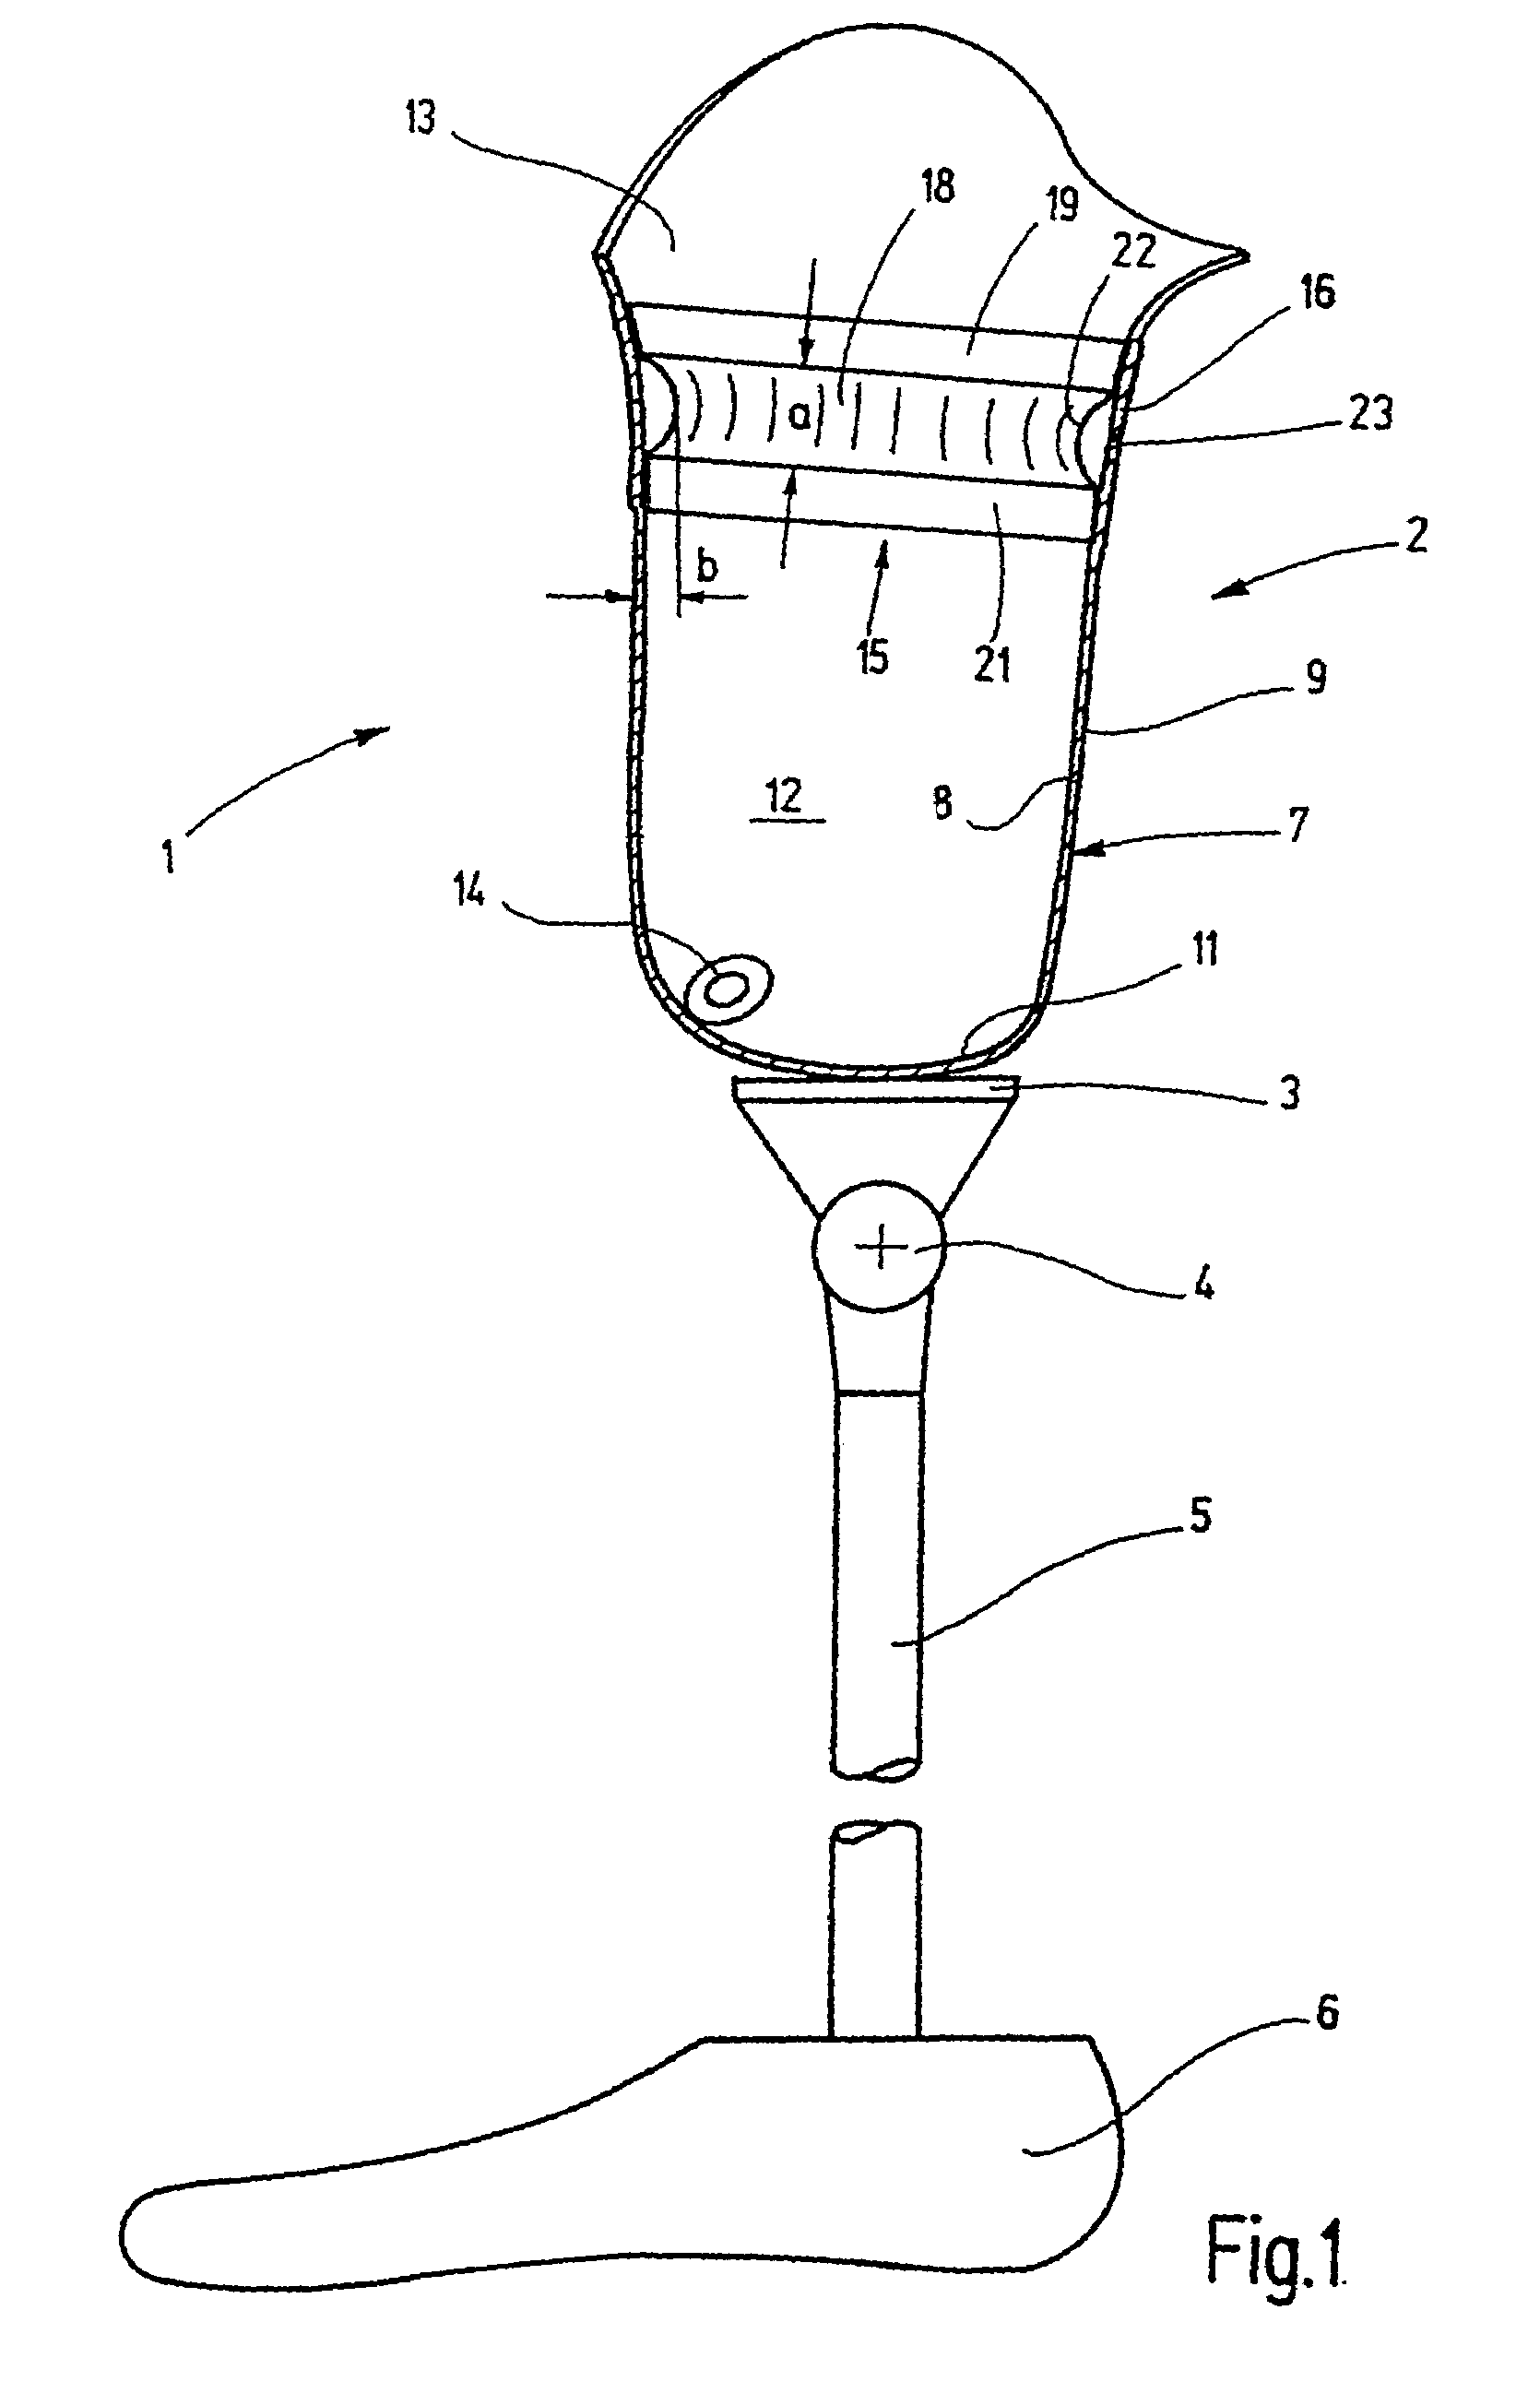 Sealing sleeve for sealing residual limb in a prosthetic socket